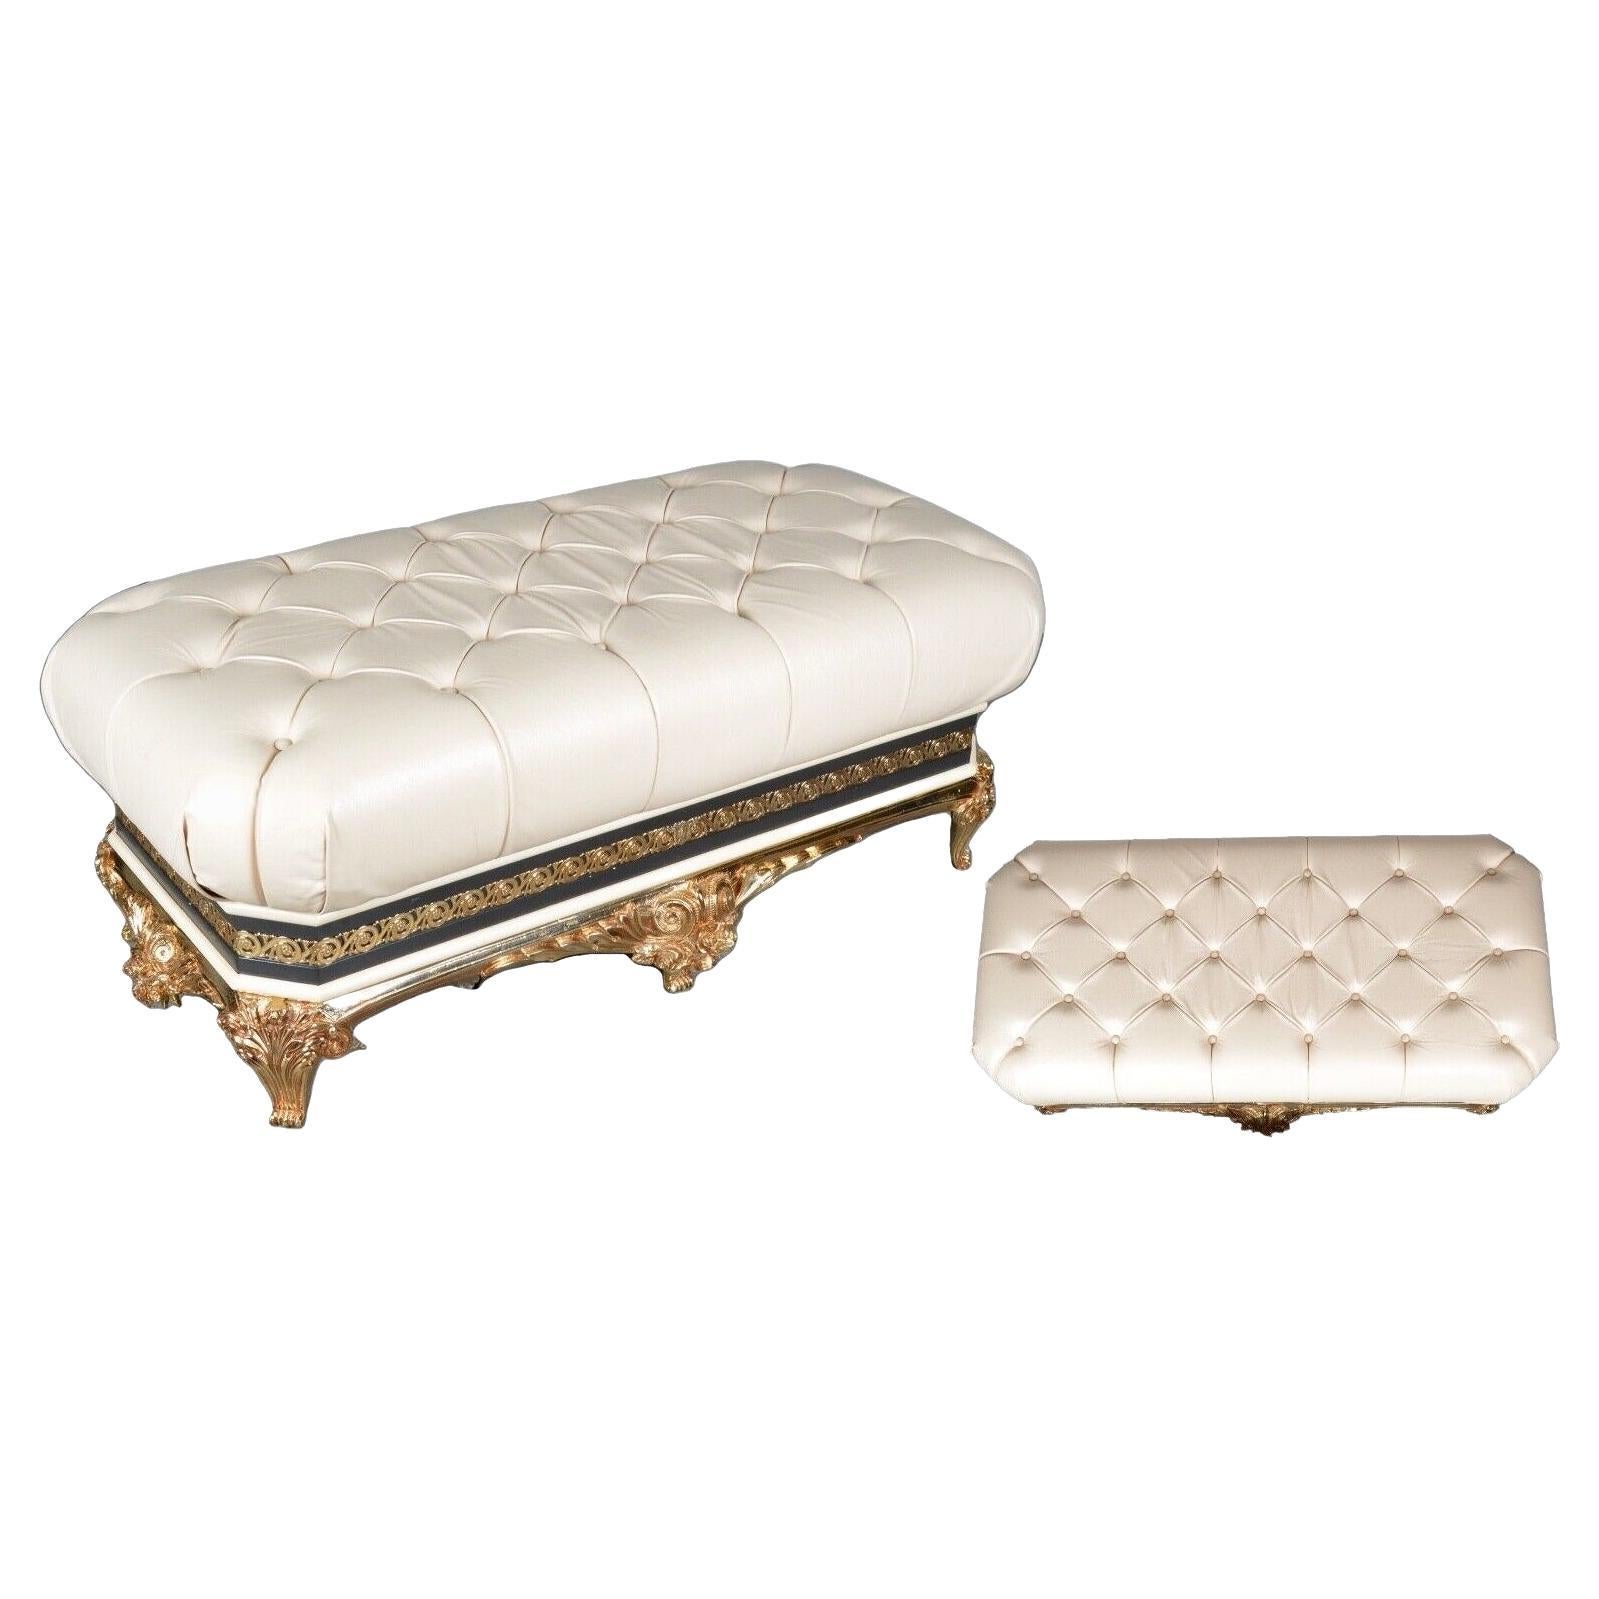 Exclusive Rococo Vidal Grau Footstool, C 1970 / Matching Furniture Available